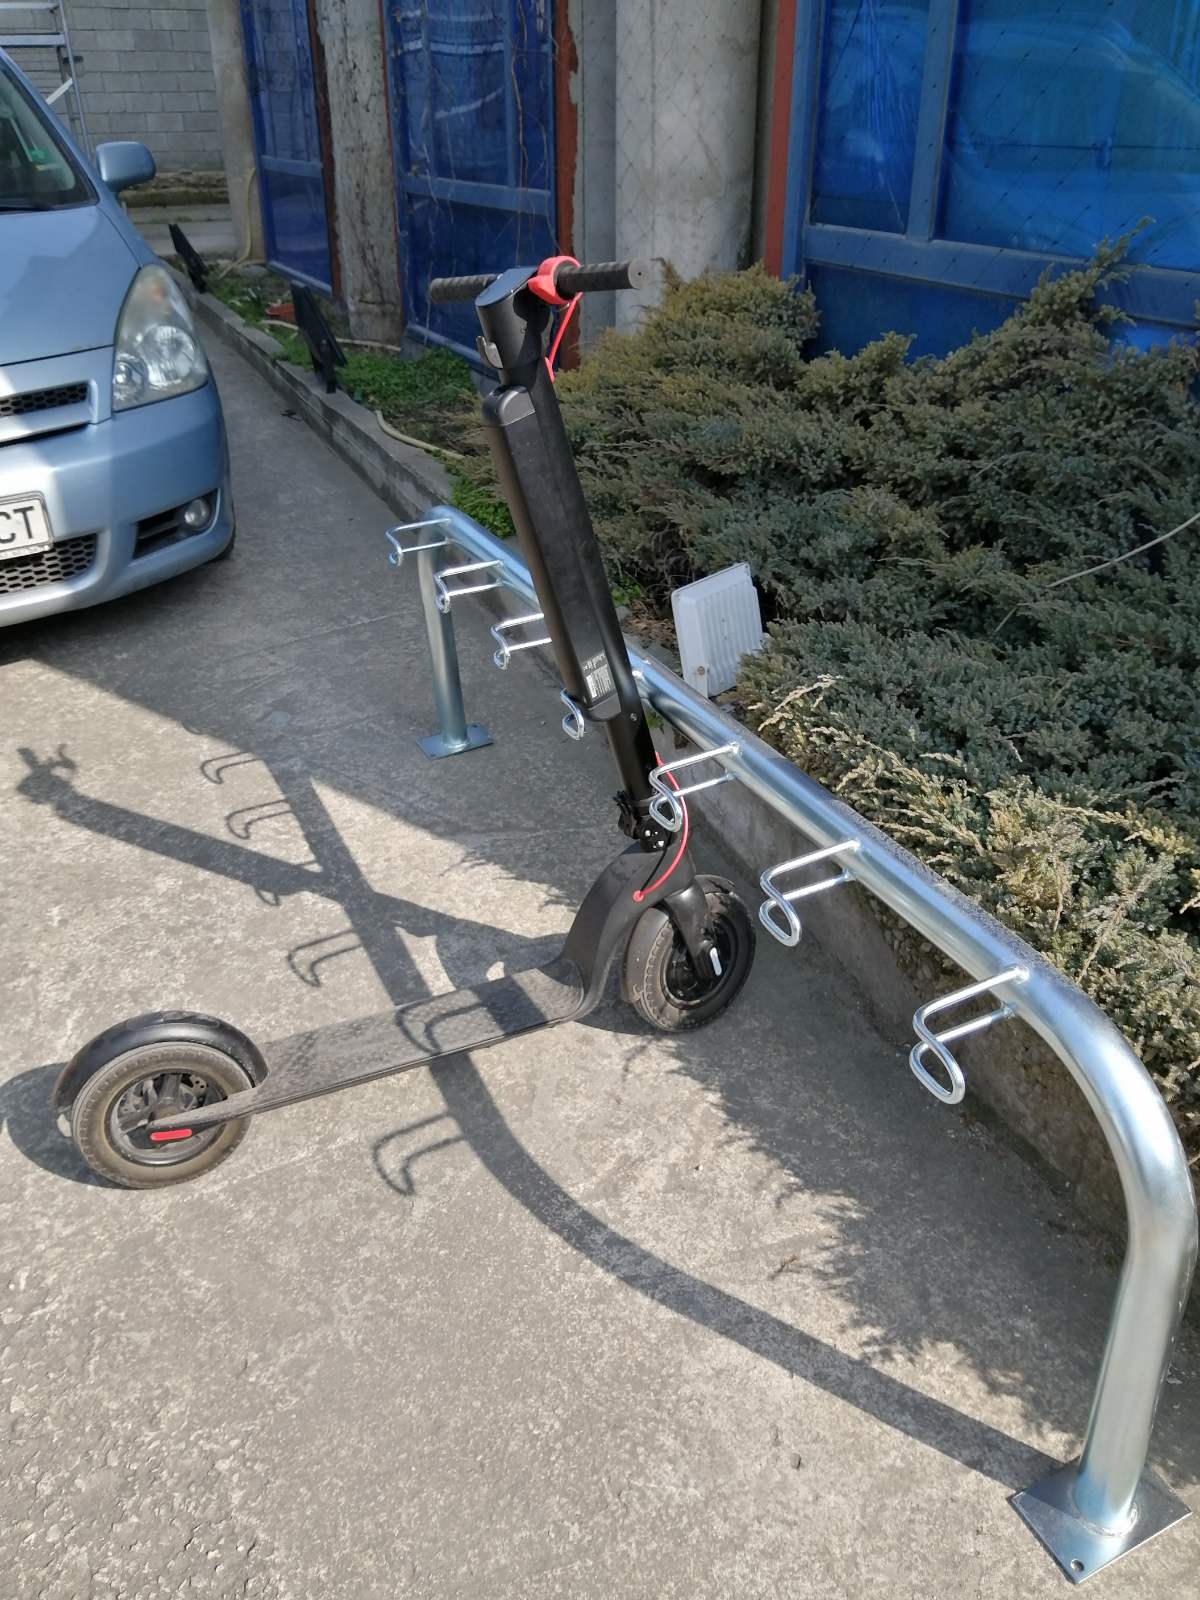 Bicycle stand scooters (7 scooters)